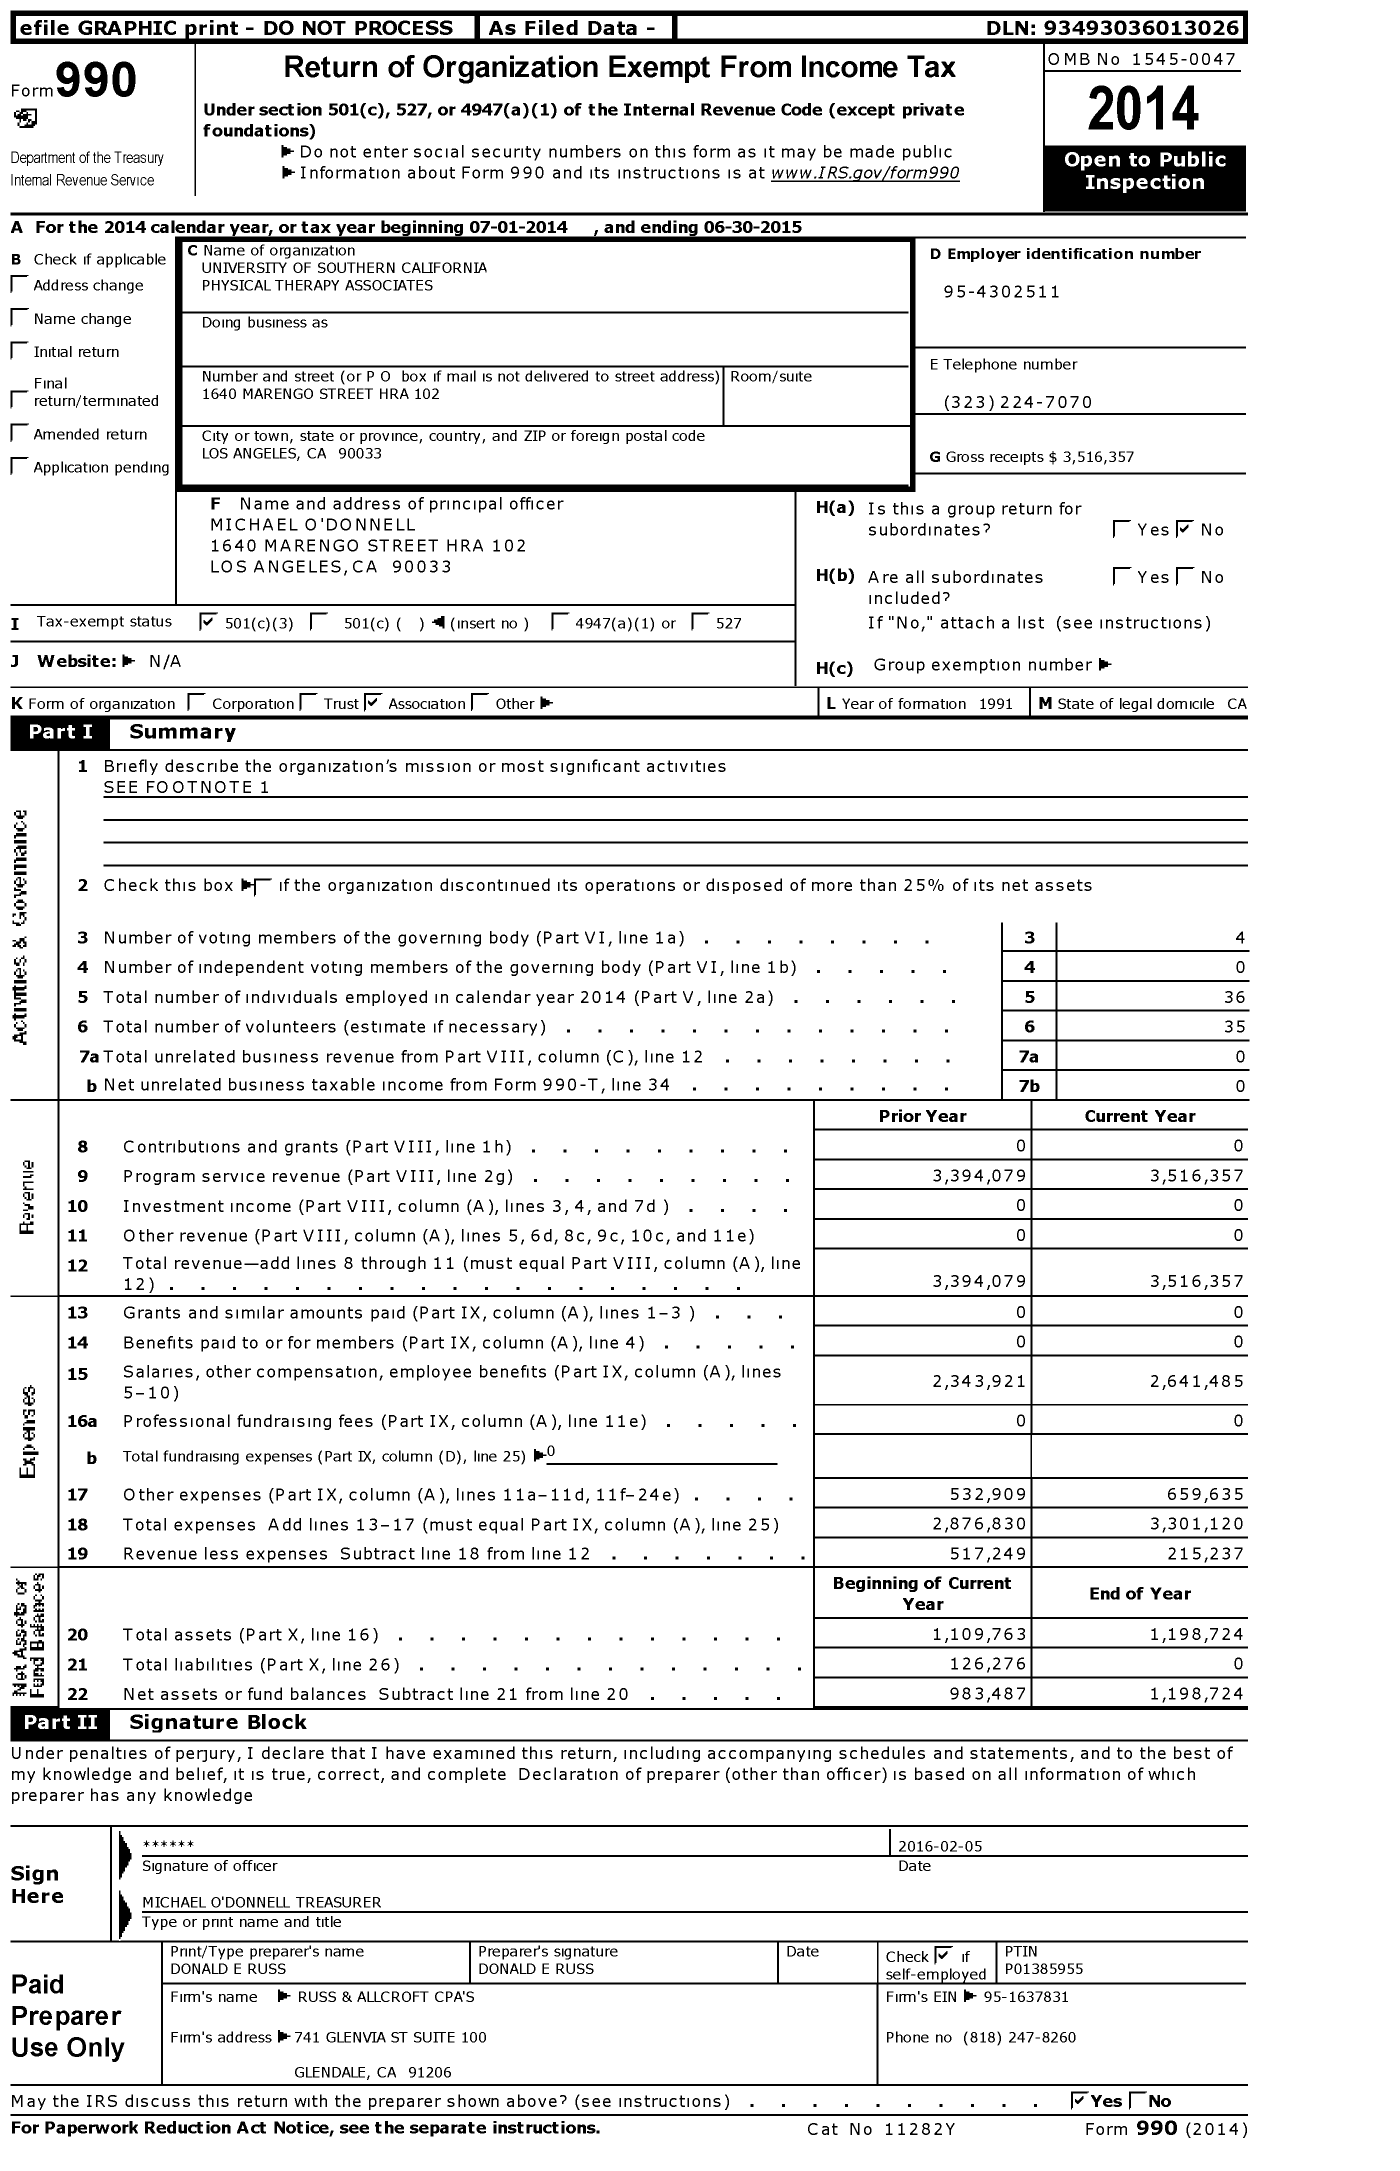 Image of first page of 2014 Form 990 for University of Southern California Physical Therapy Associates